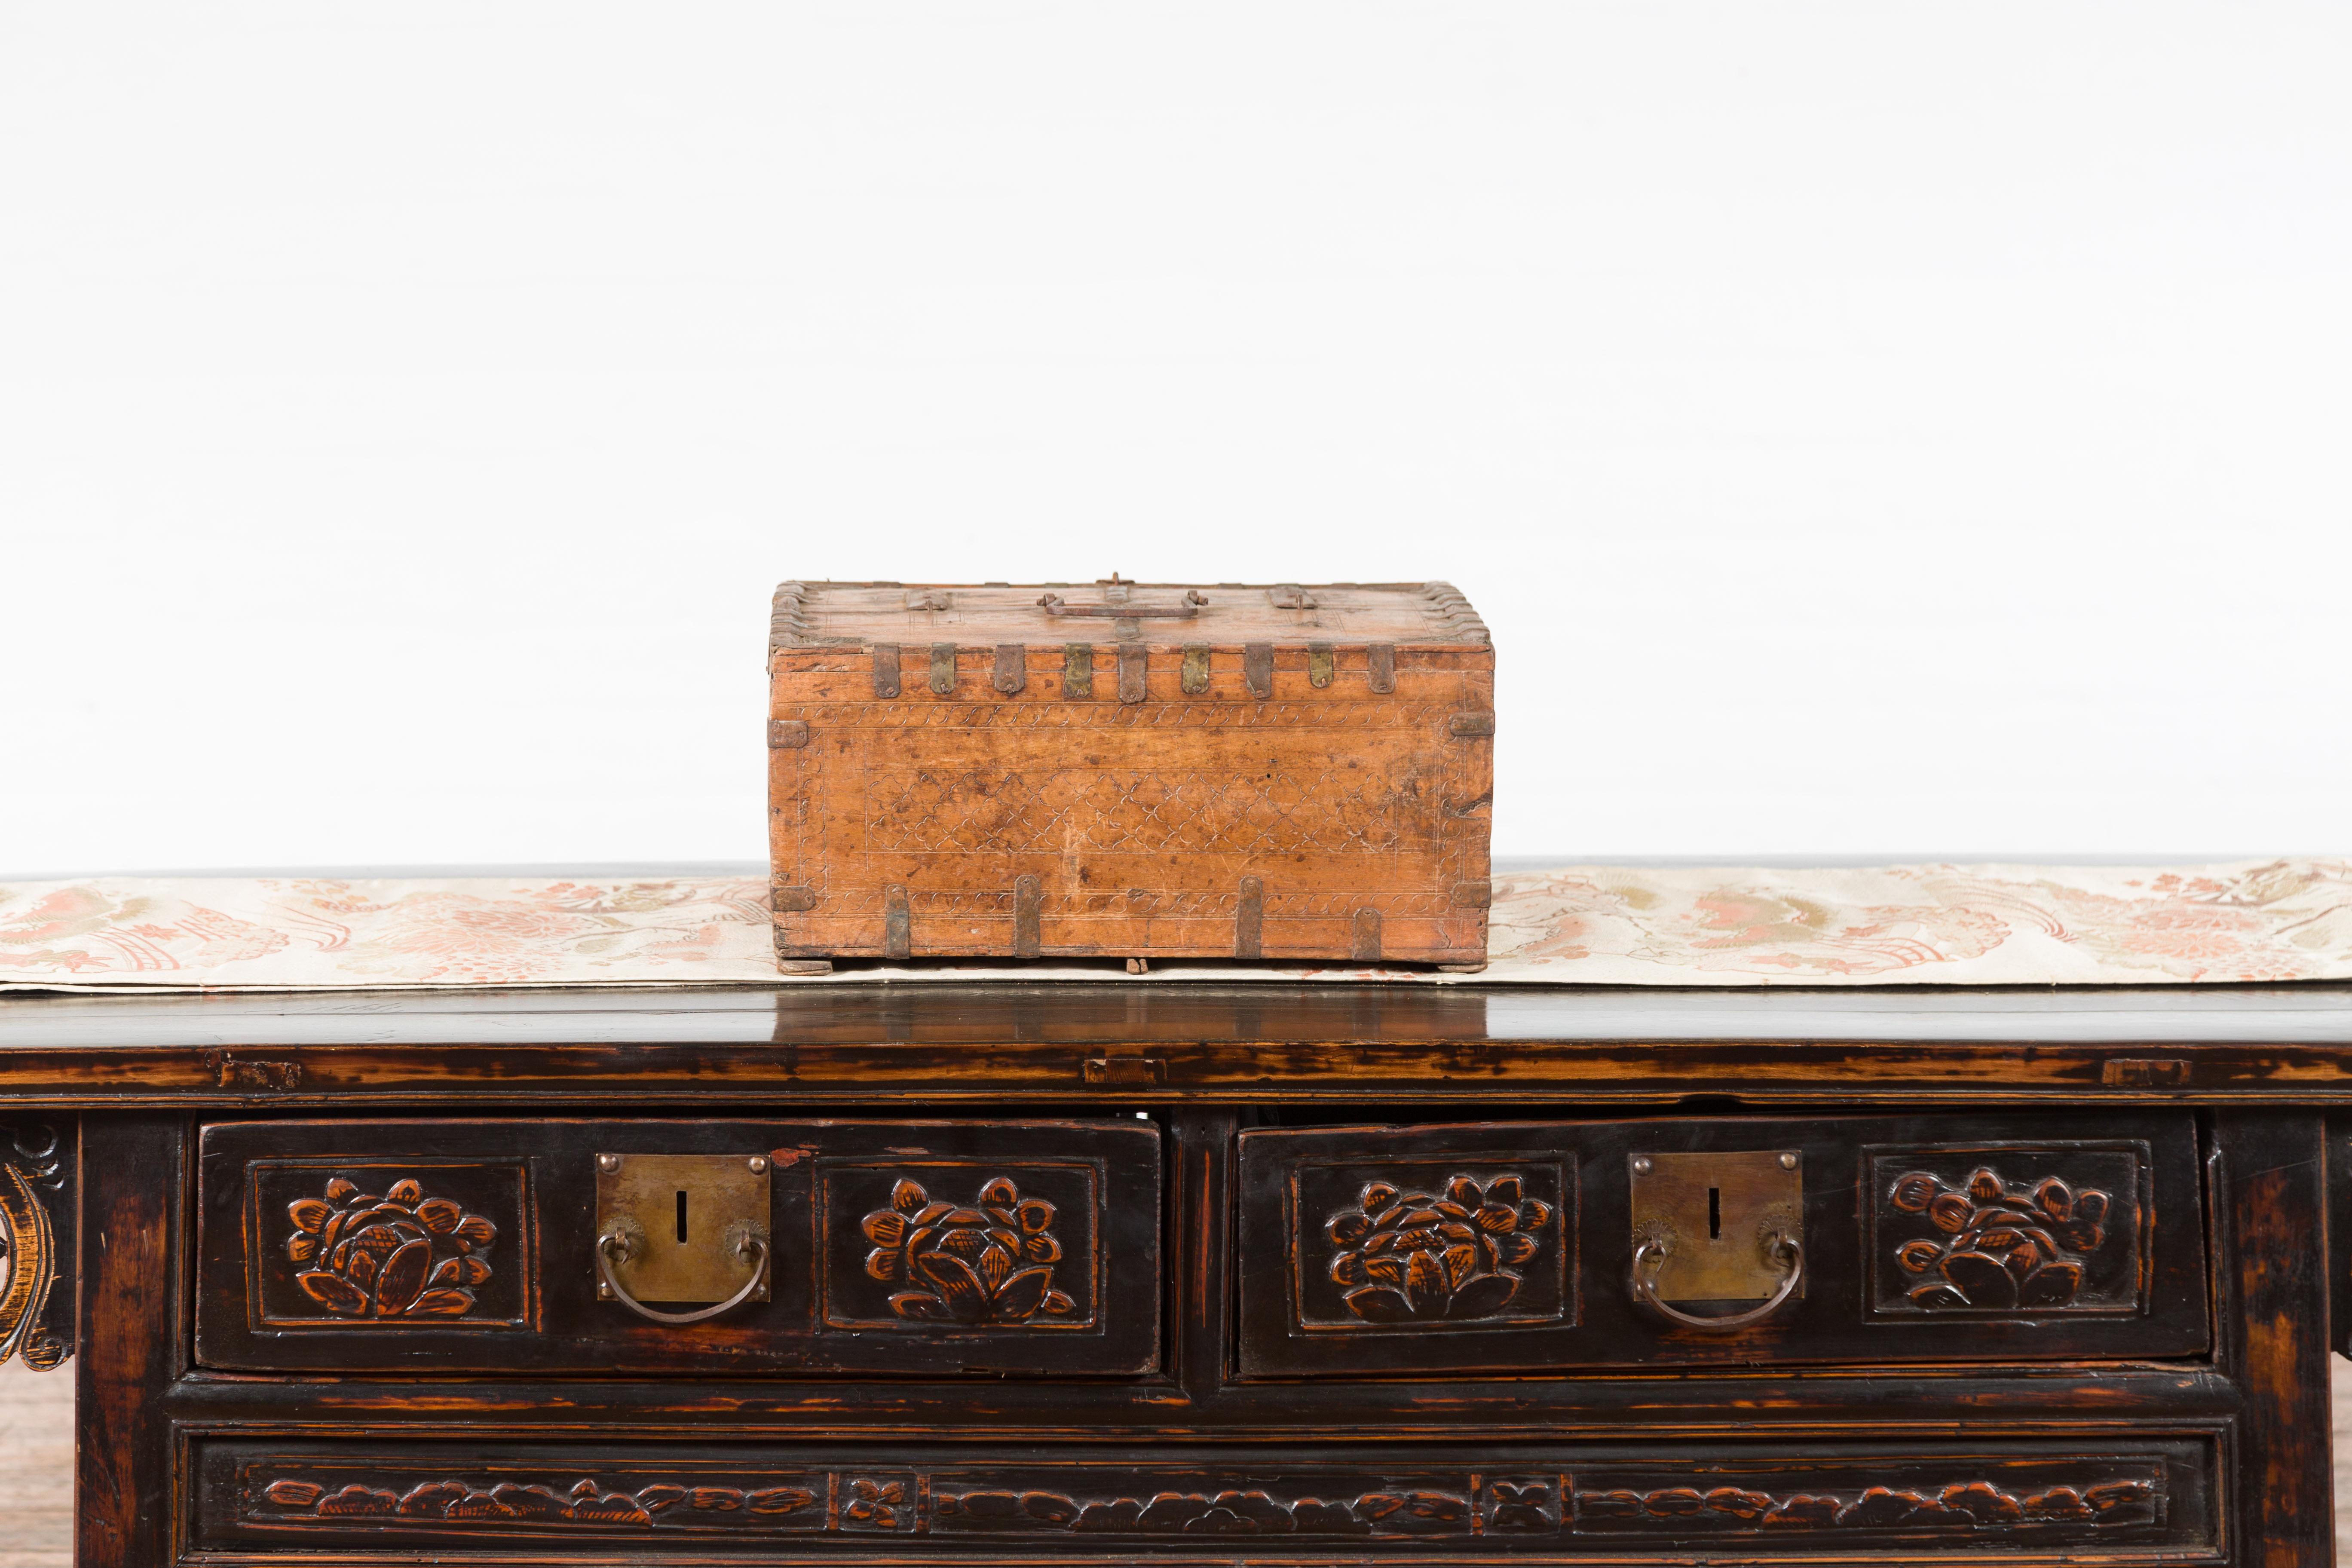 Rustic Indian 19th Century Compartmented Box with Iron Details and Carved Motifs For Sale 5